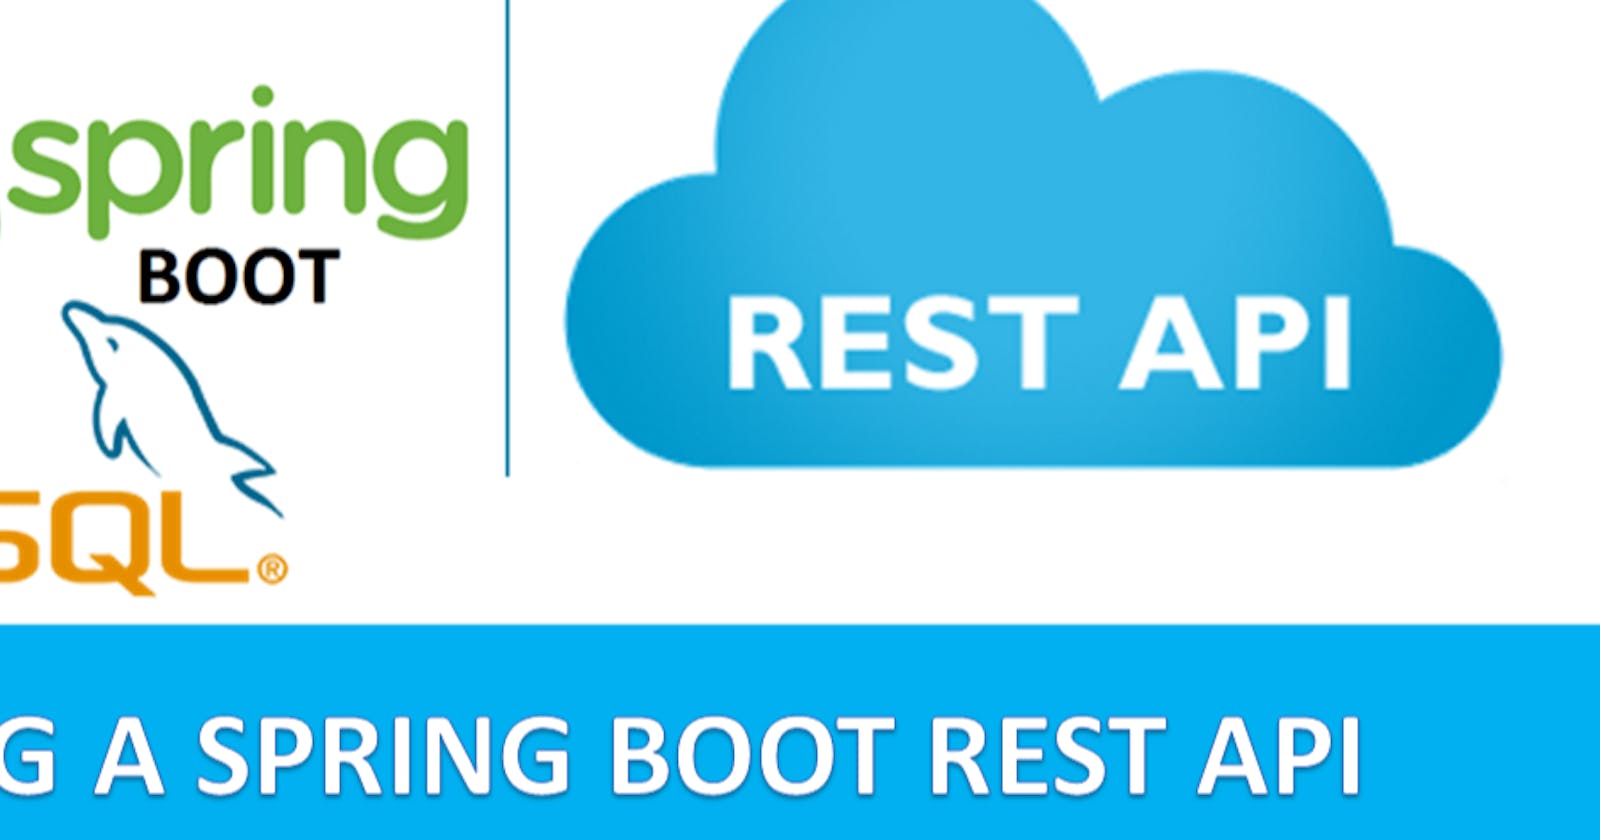 Building a Spring Boot REST API with MySQL and JPA